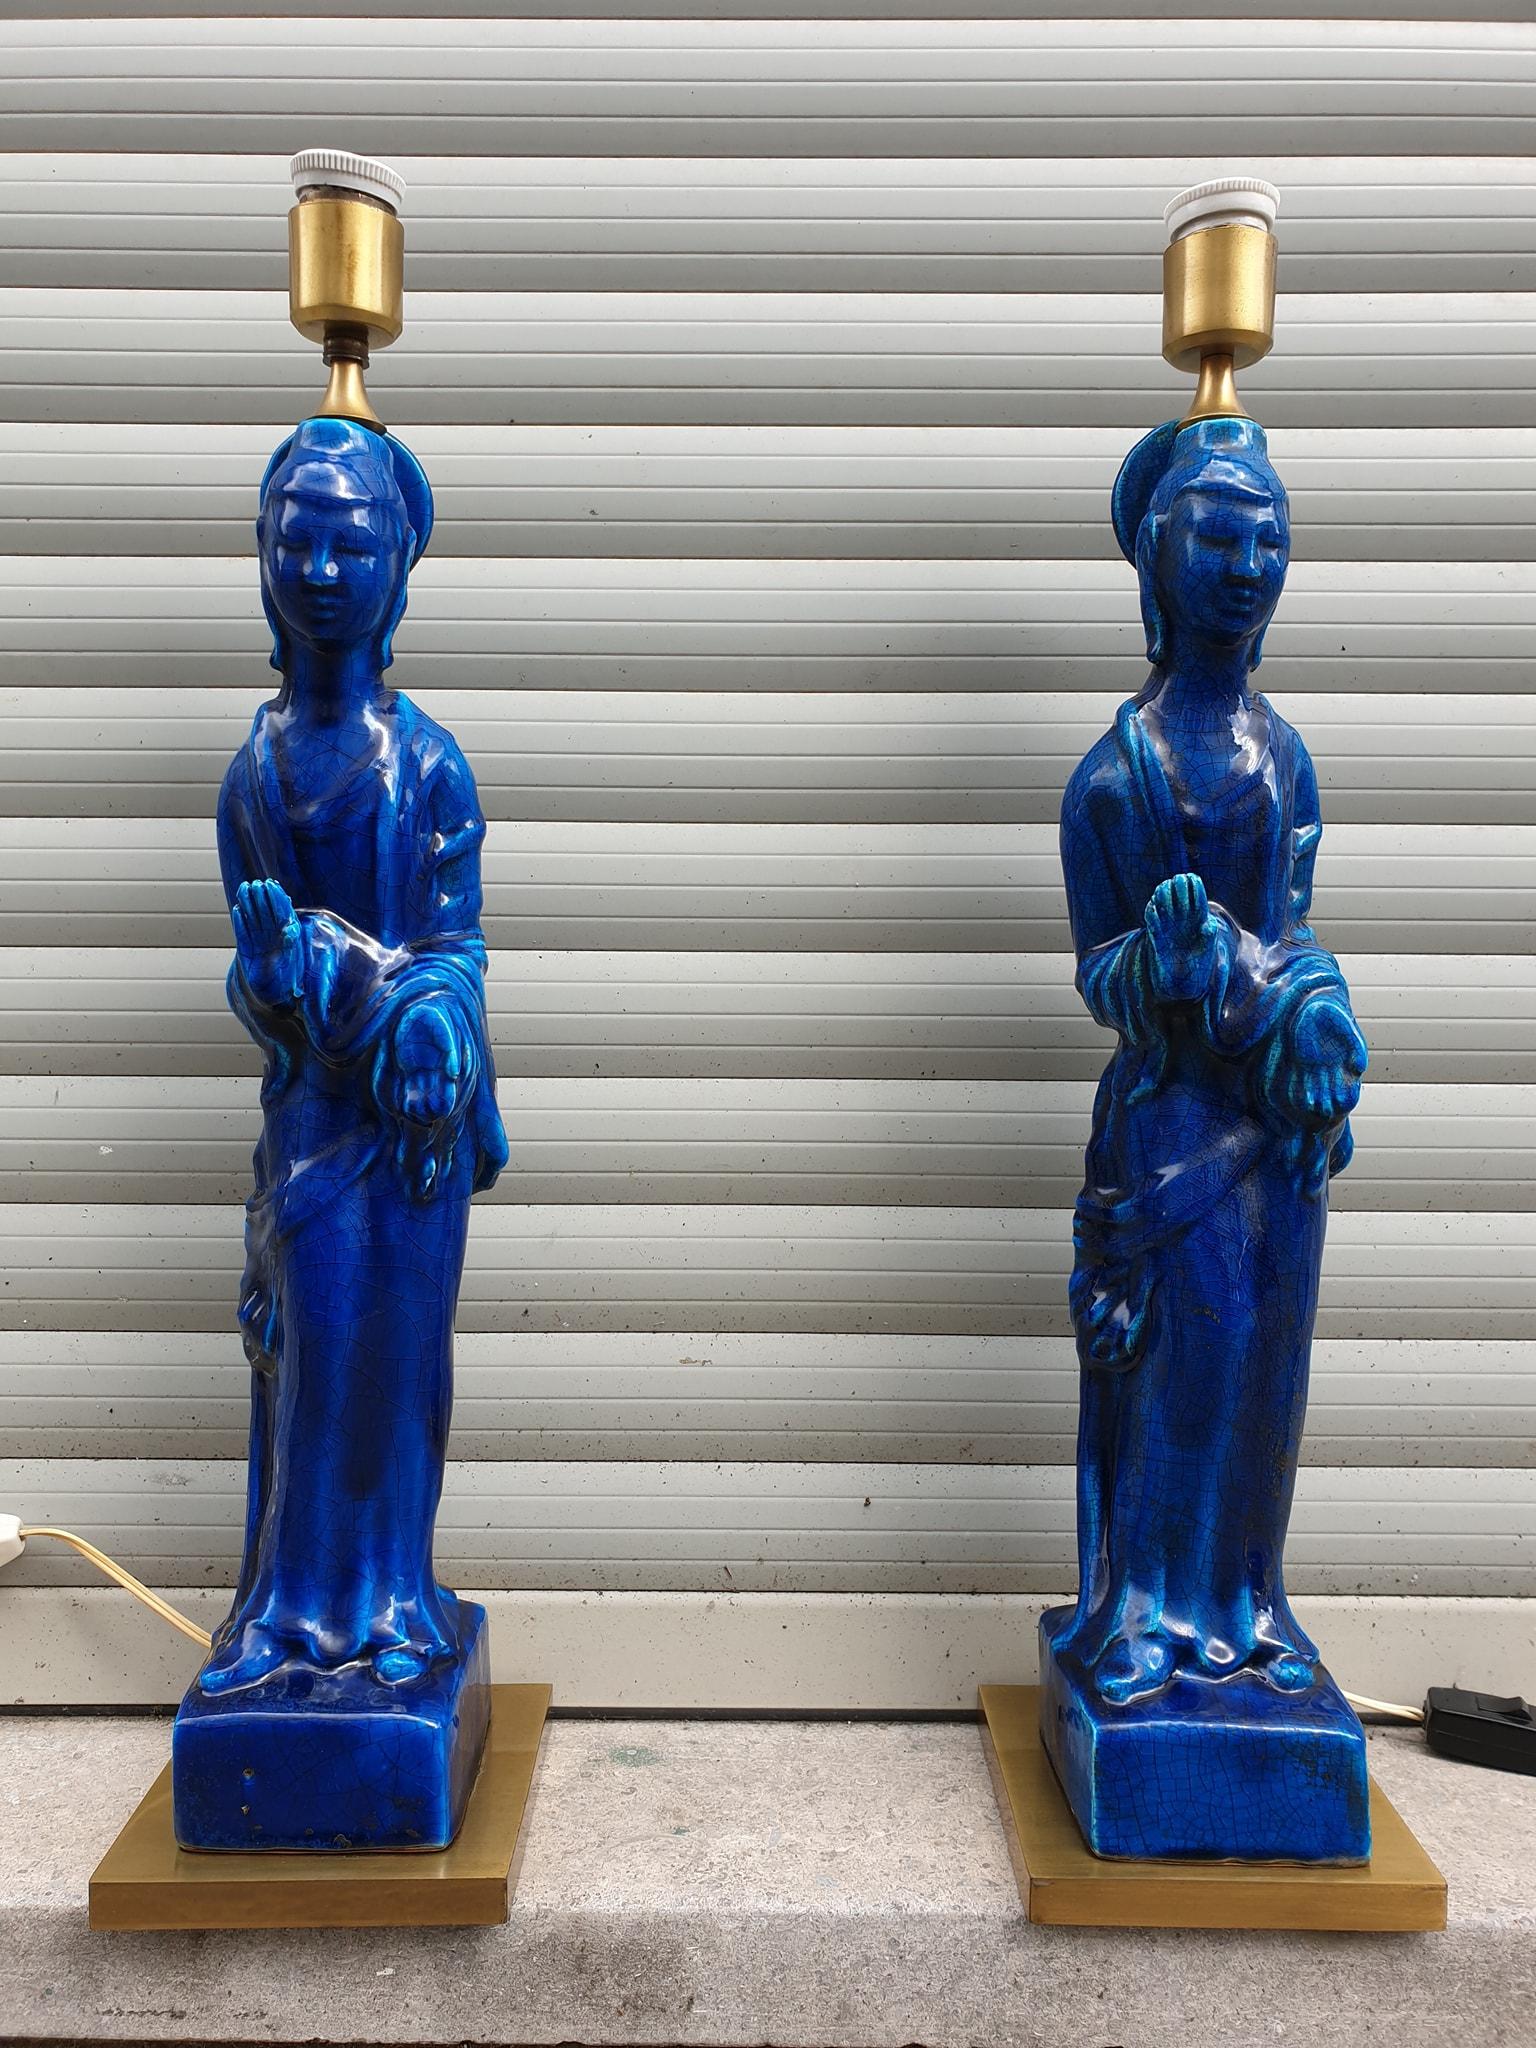 Amazing pair of Ugo Zaccagnini, gold brass base and blue ceramic Chinese Buddha lamps, circa 1950 by Designer Ugo Zaccagnini. Made in Italy.
Beautiful unique pair of matching lamps.
Measures: Height with shade 90 cm,
Diameter shade 34 cm., width